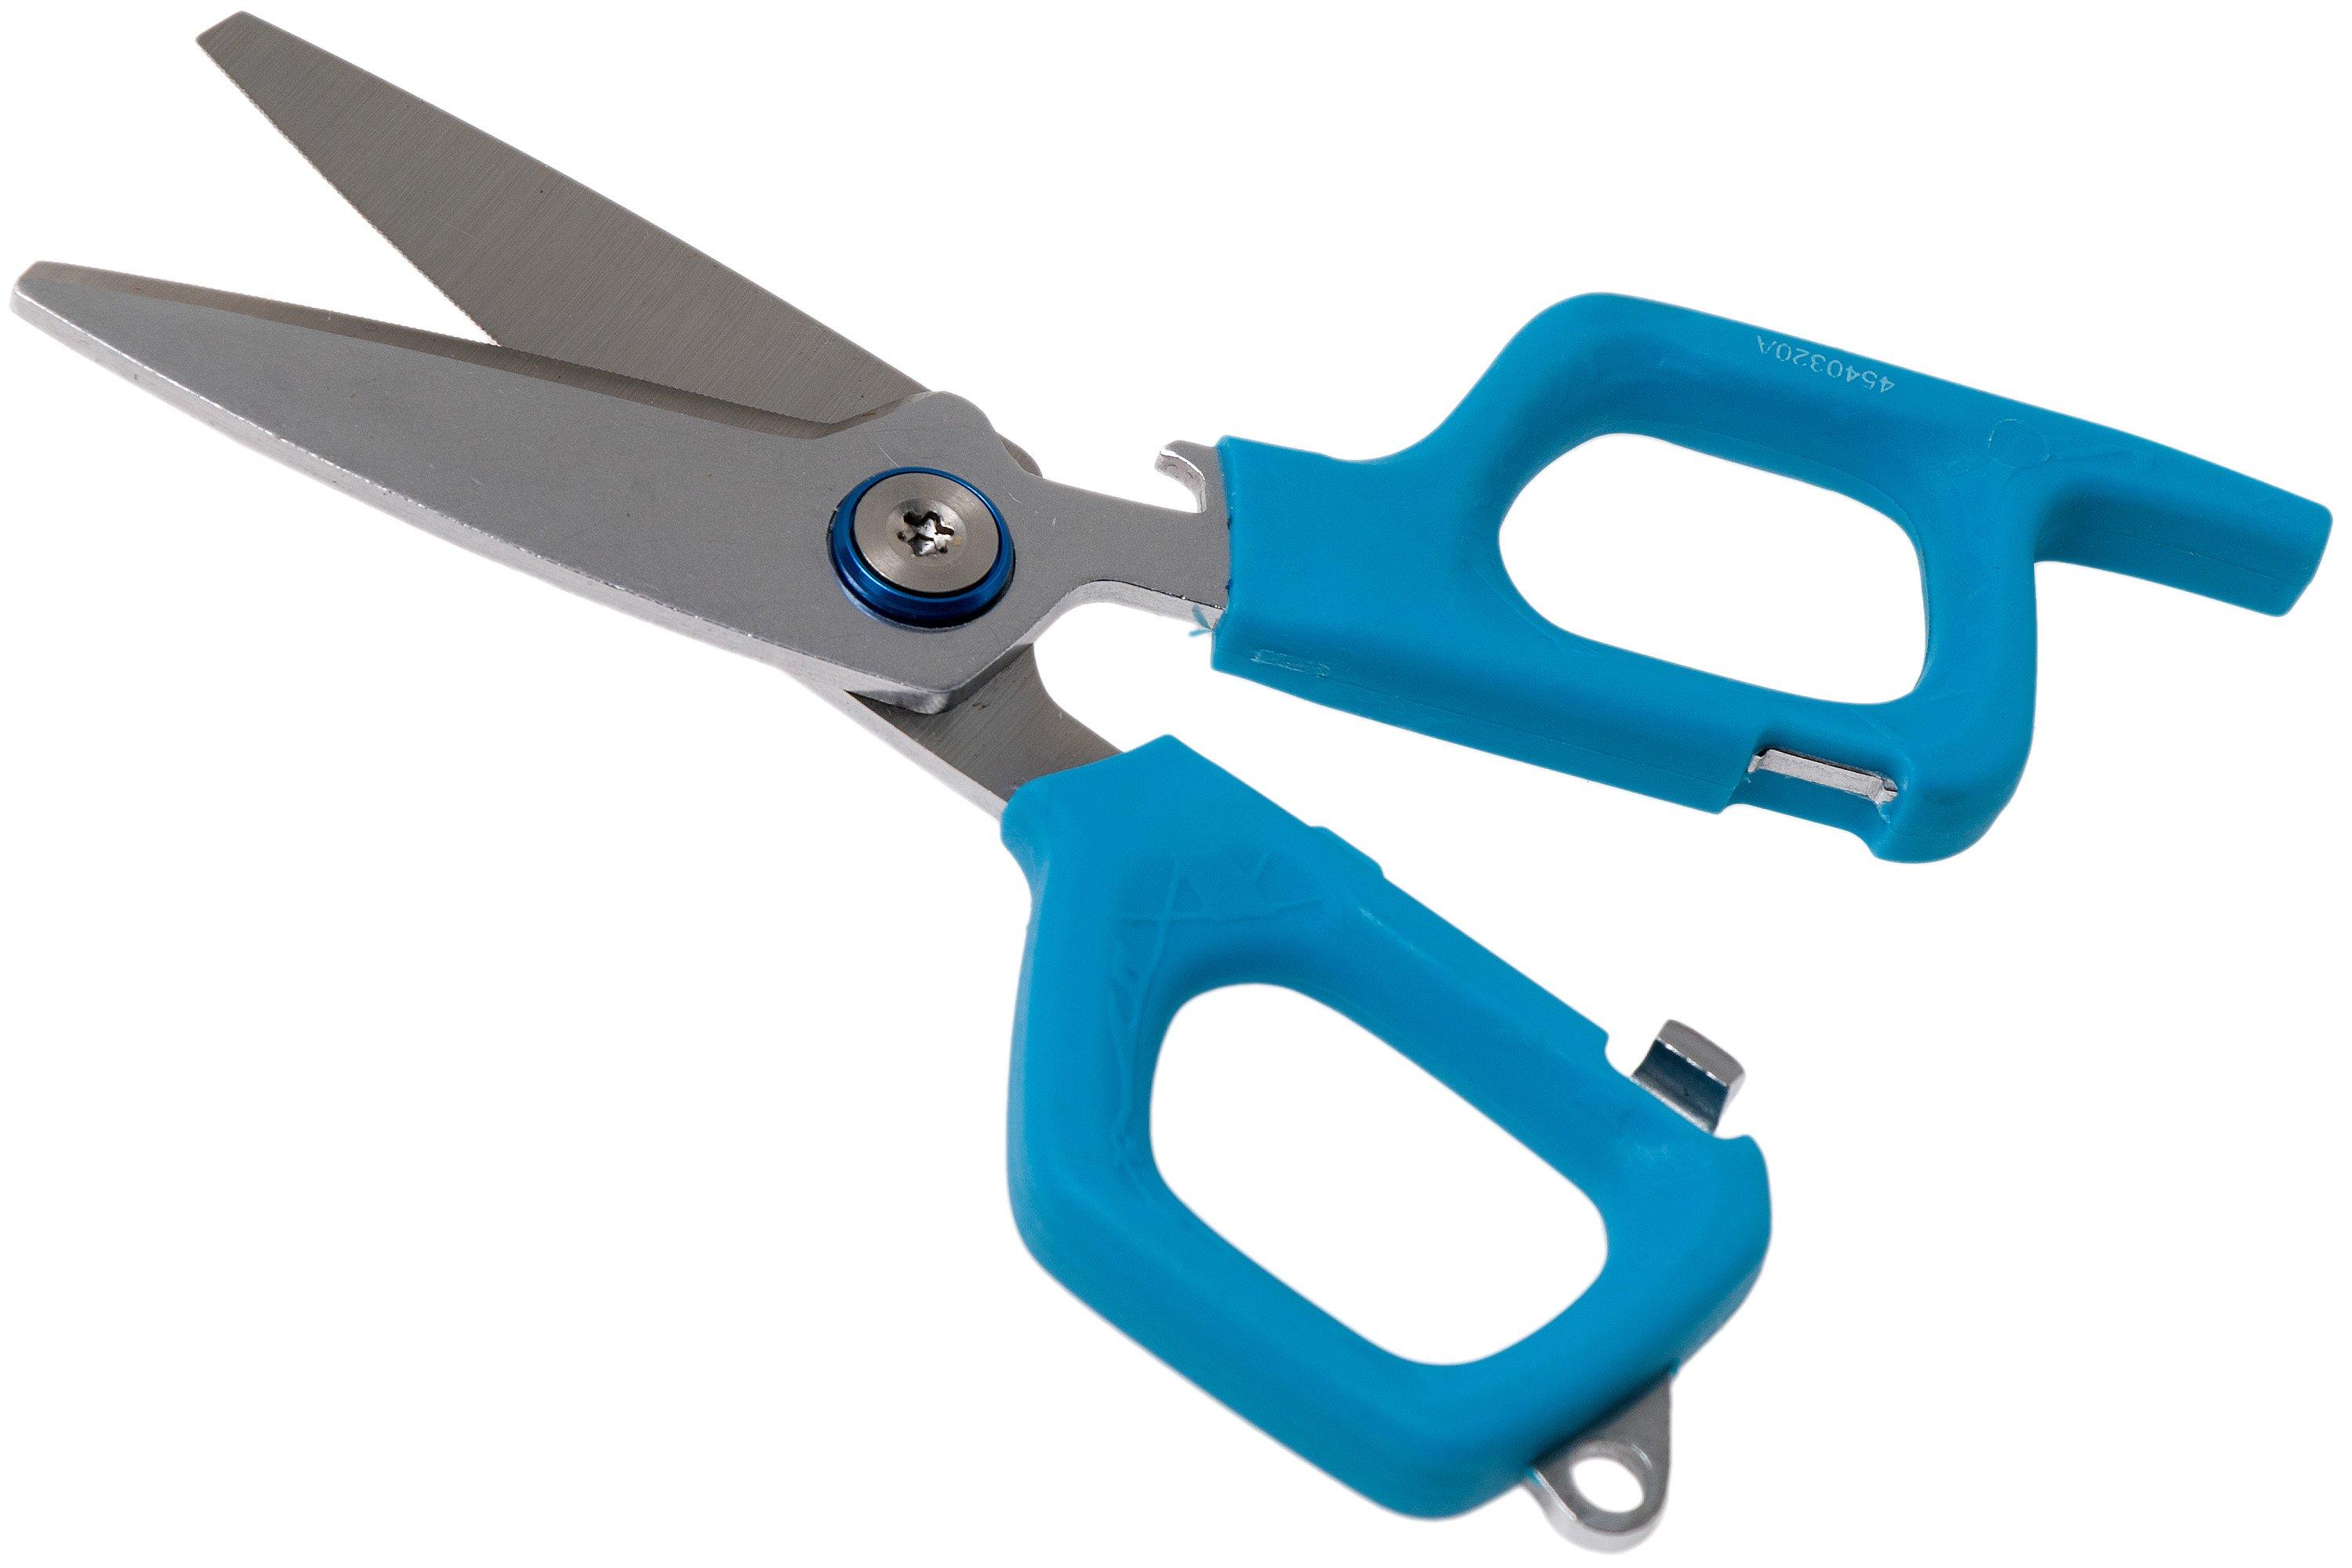 Gerber Neat Freak Braided Line Cutters Review - Pro Tool Reviews